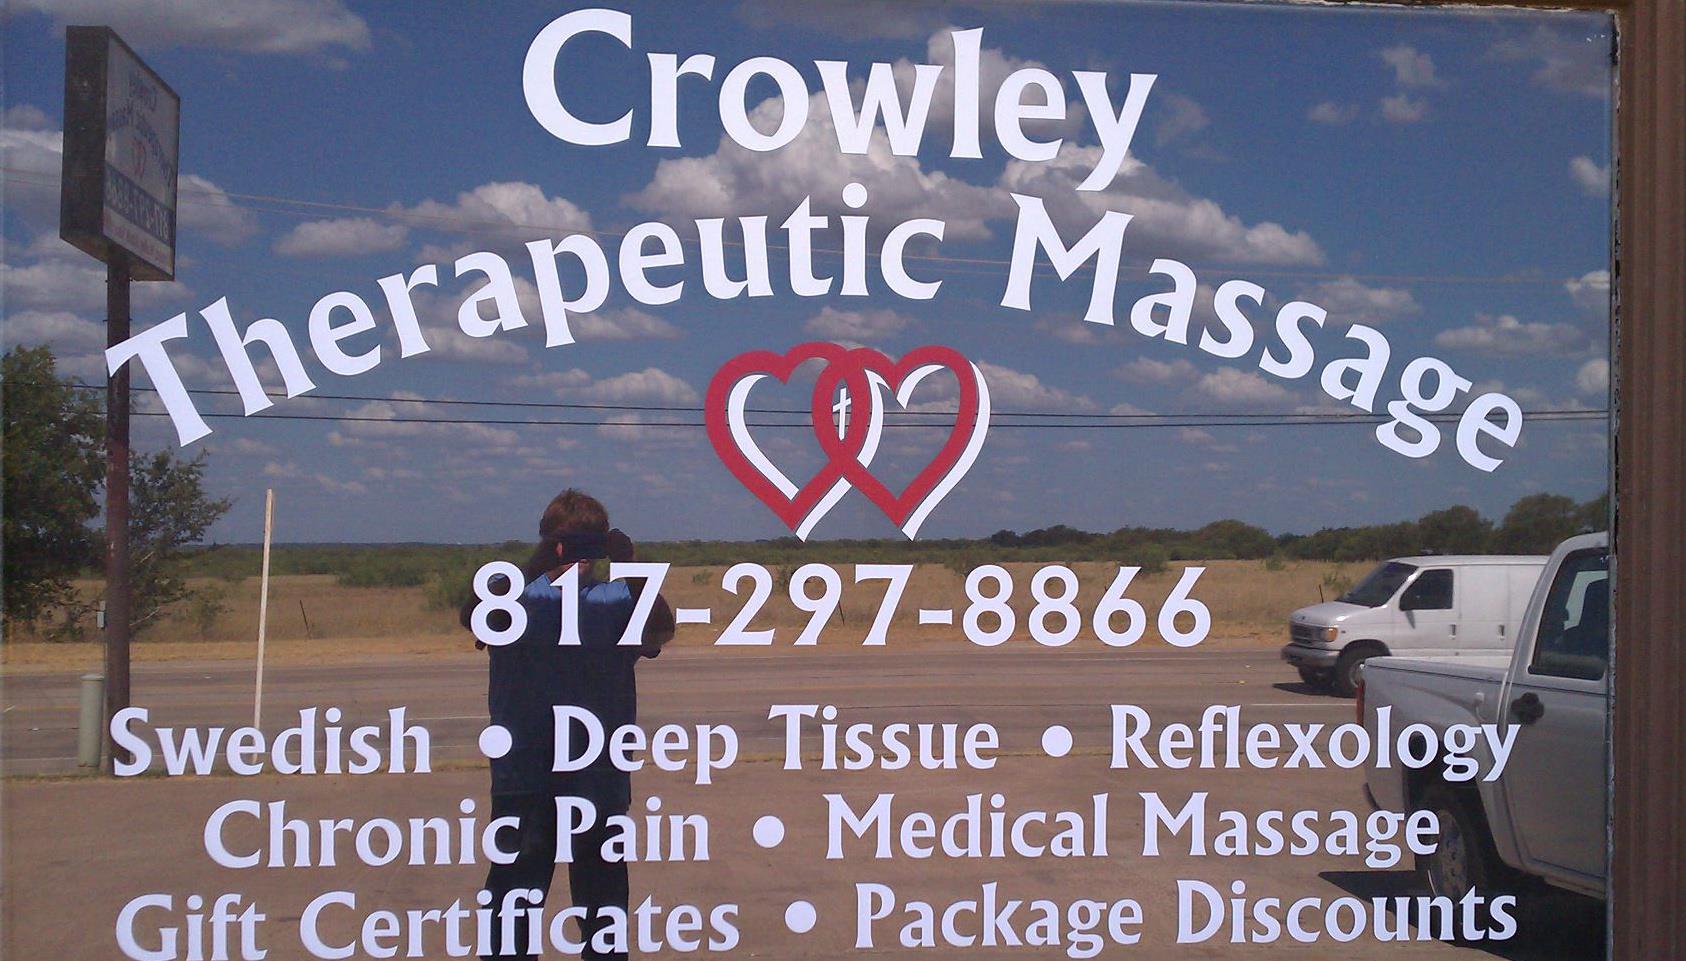 Crowley Therapeutic Massage 775 FM 1187 Inside Physical Therapy Dynamics, Crowley Texas 76036